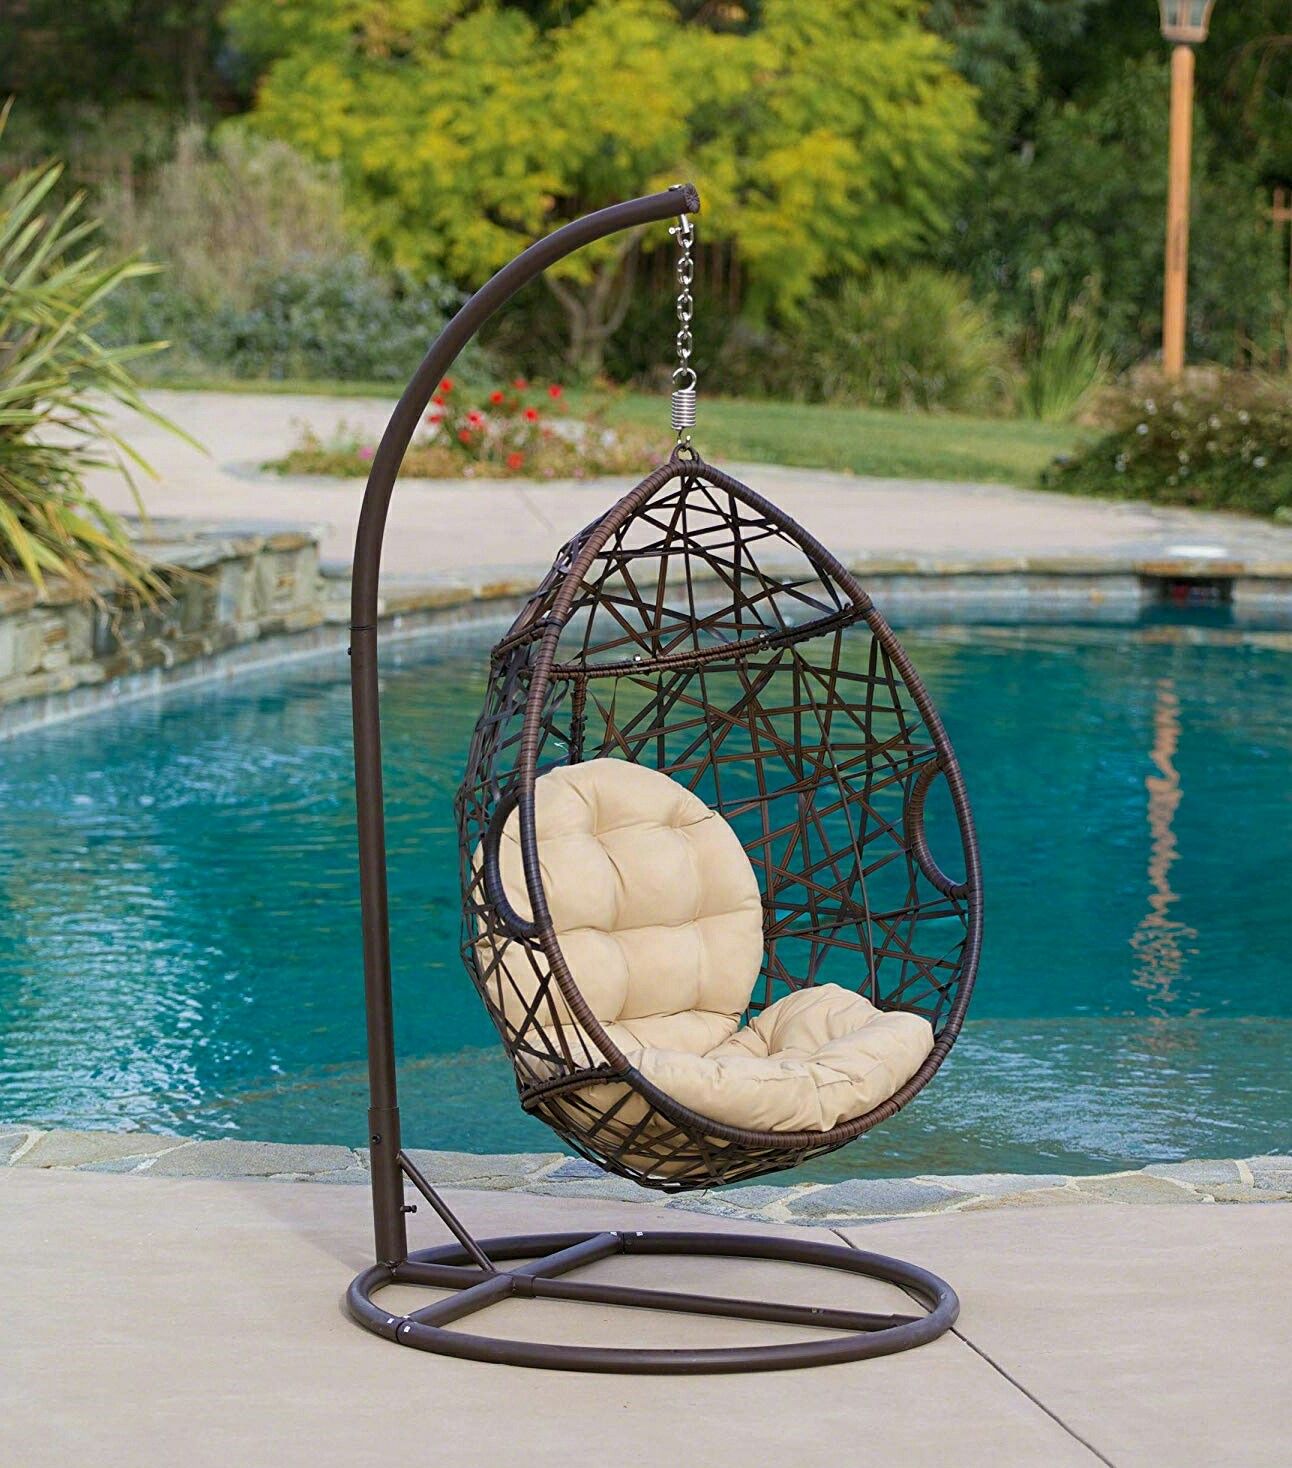 Hanging Egg Chair with Stand & Cushion Outdoor Patio Porch Wicker Swing Seat